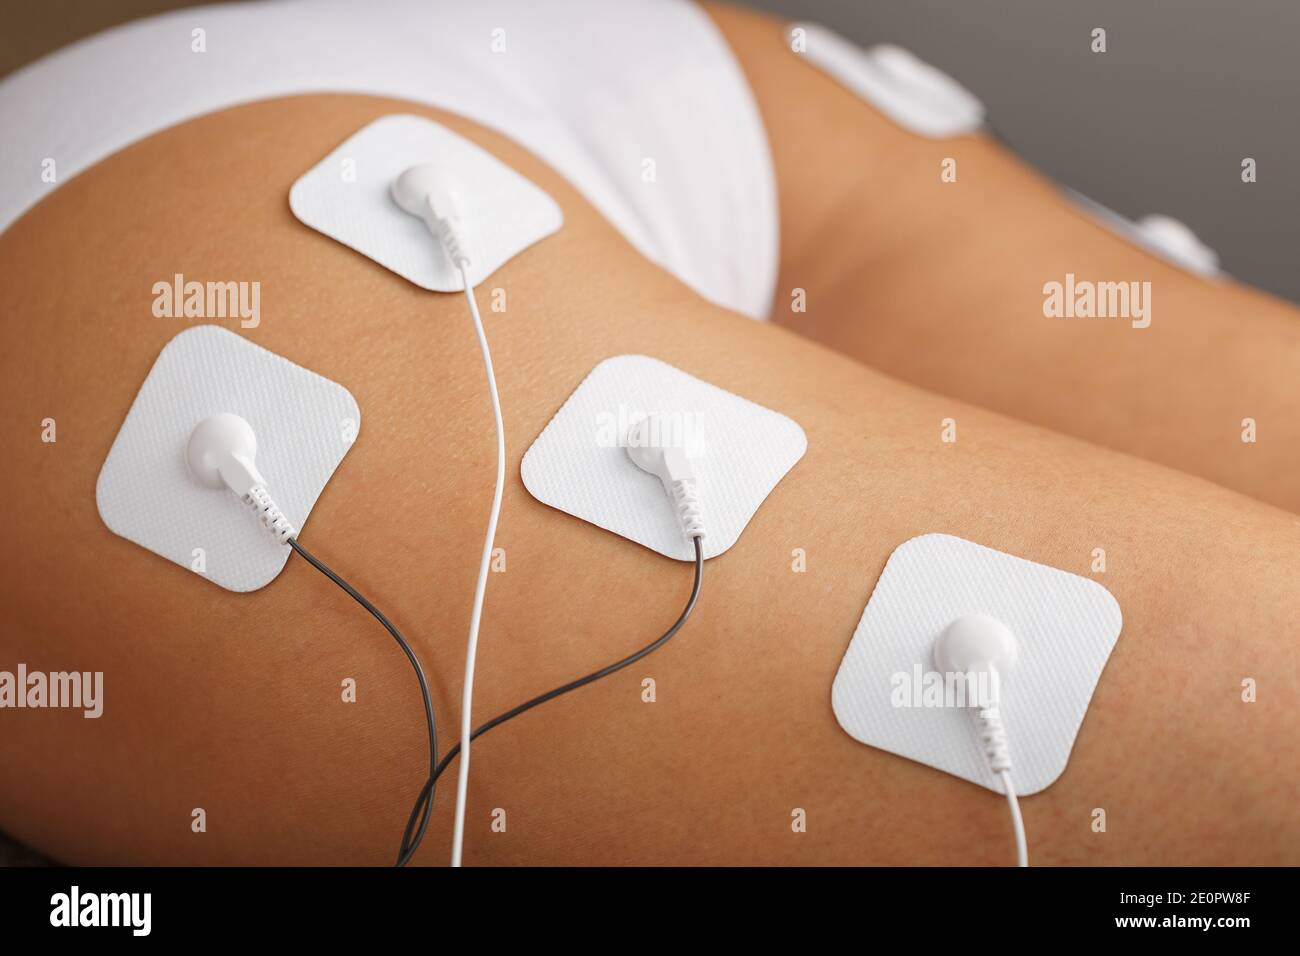 https://c8.alamy.com/comp/2E0PW8F/myostimulation-electrodes-on-the-buttocks-and-legs-of-a-woman-in-a-beauty-salon-rehabilitation-and-treatment-weight-loss-2E0PW8F.jpg